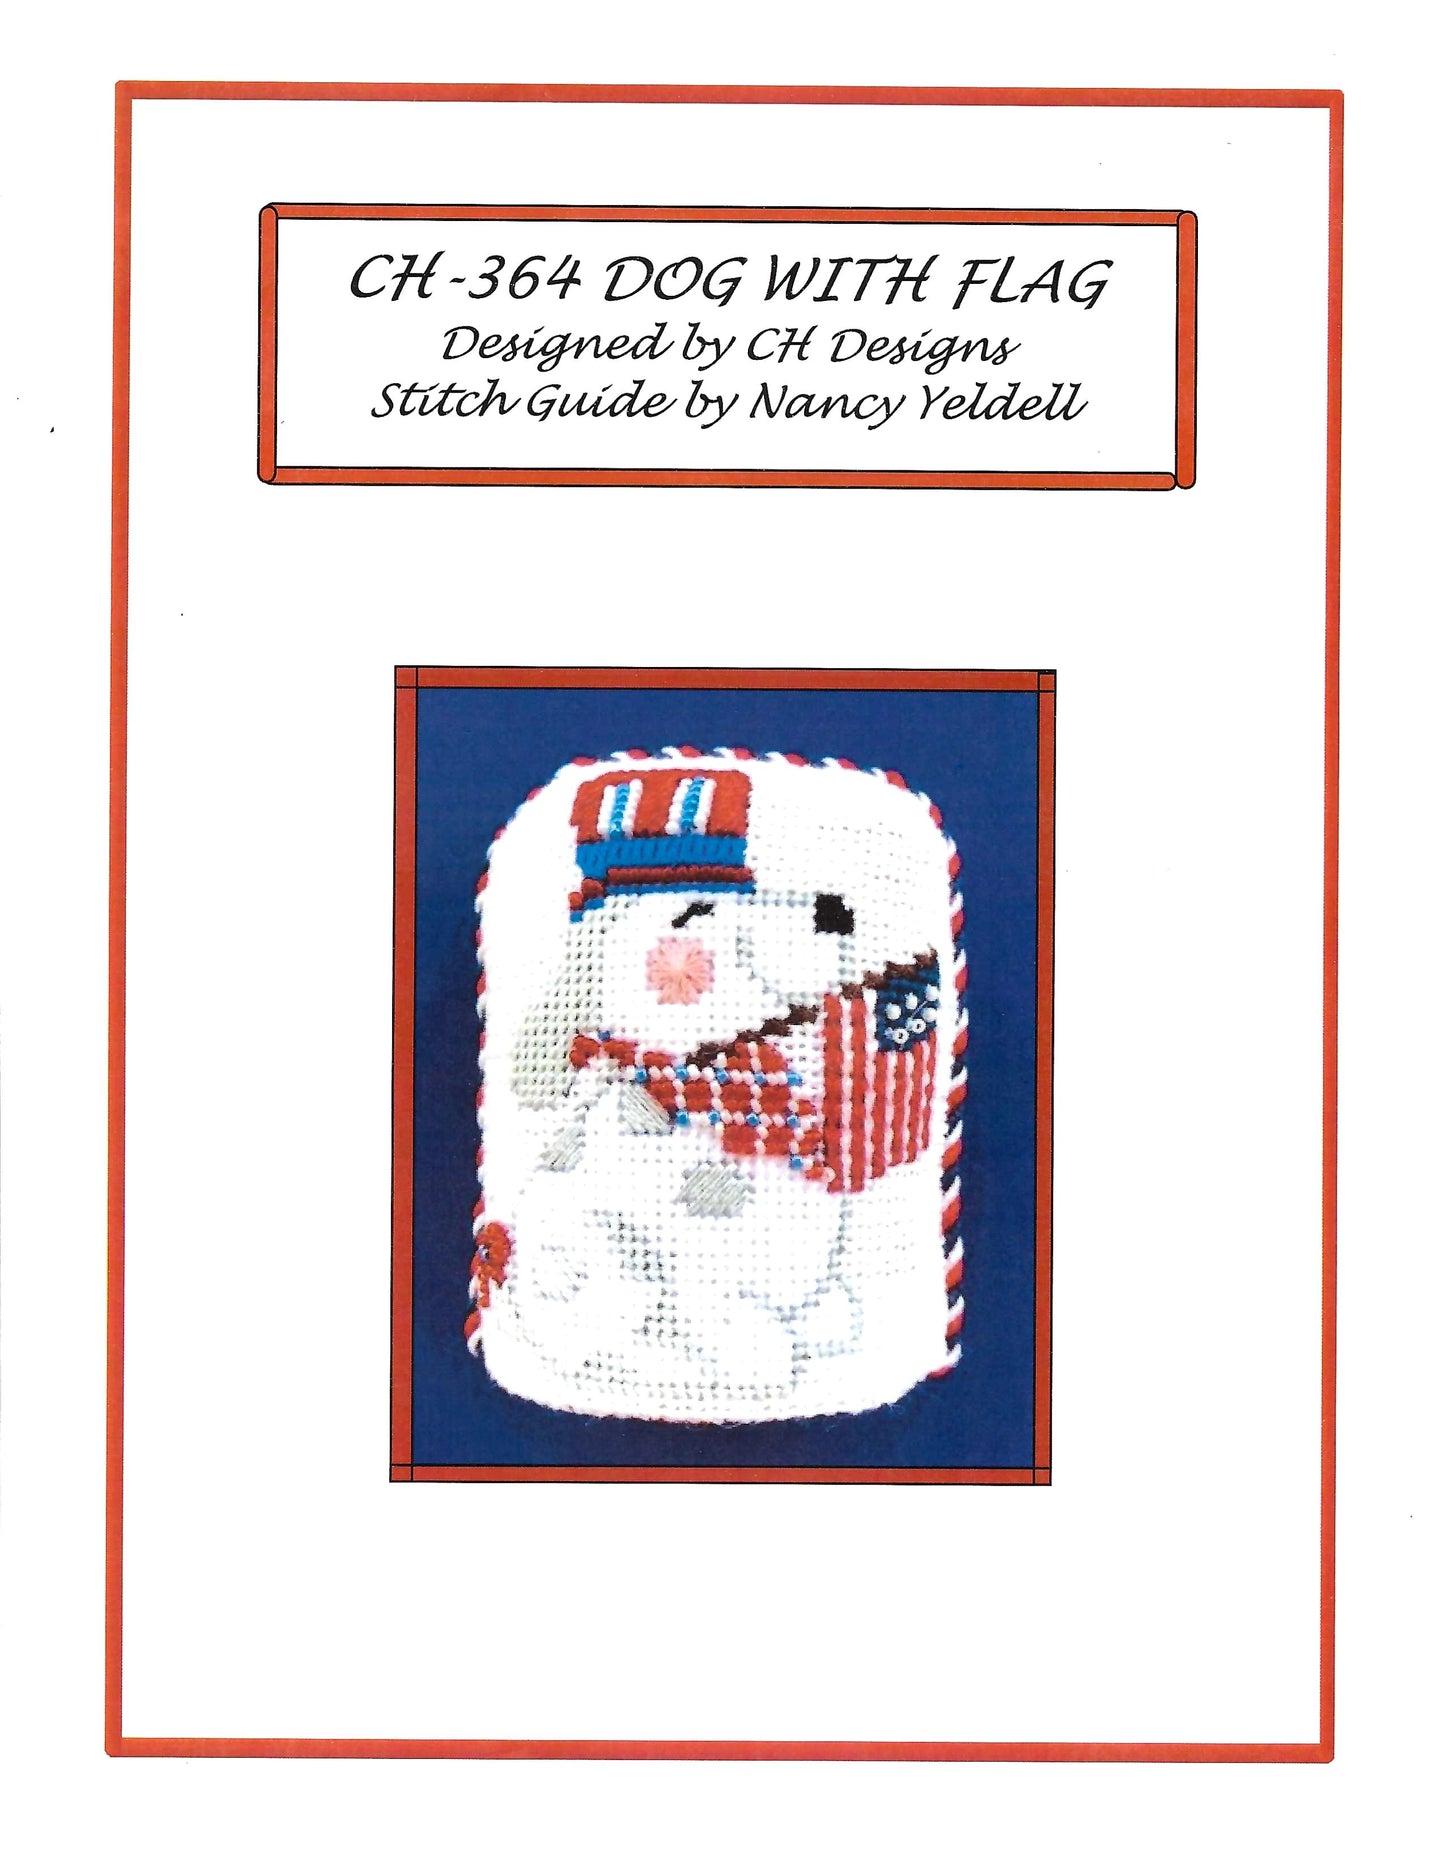 Dog Canvas ~ Patriotic DOG with Flag R,W & B Needlepoint Canvas & STITCH GUIDE by CH Designs from Danji